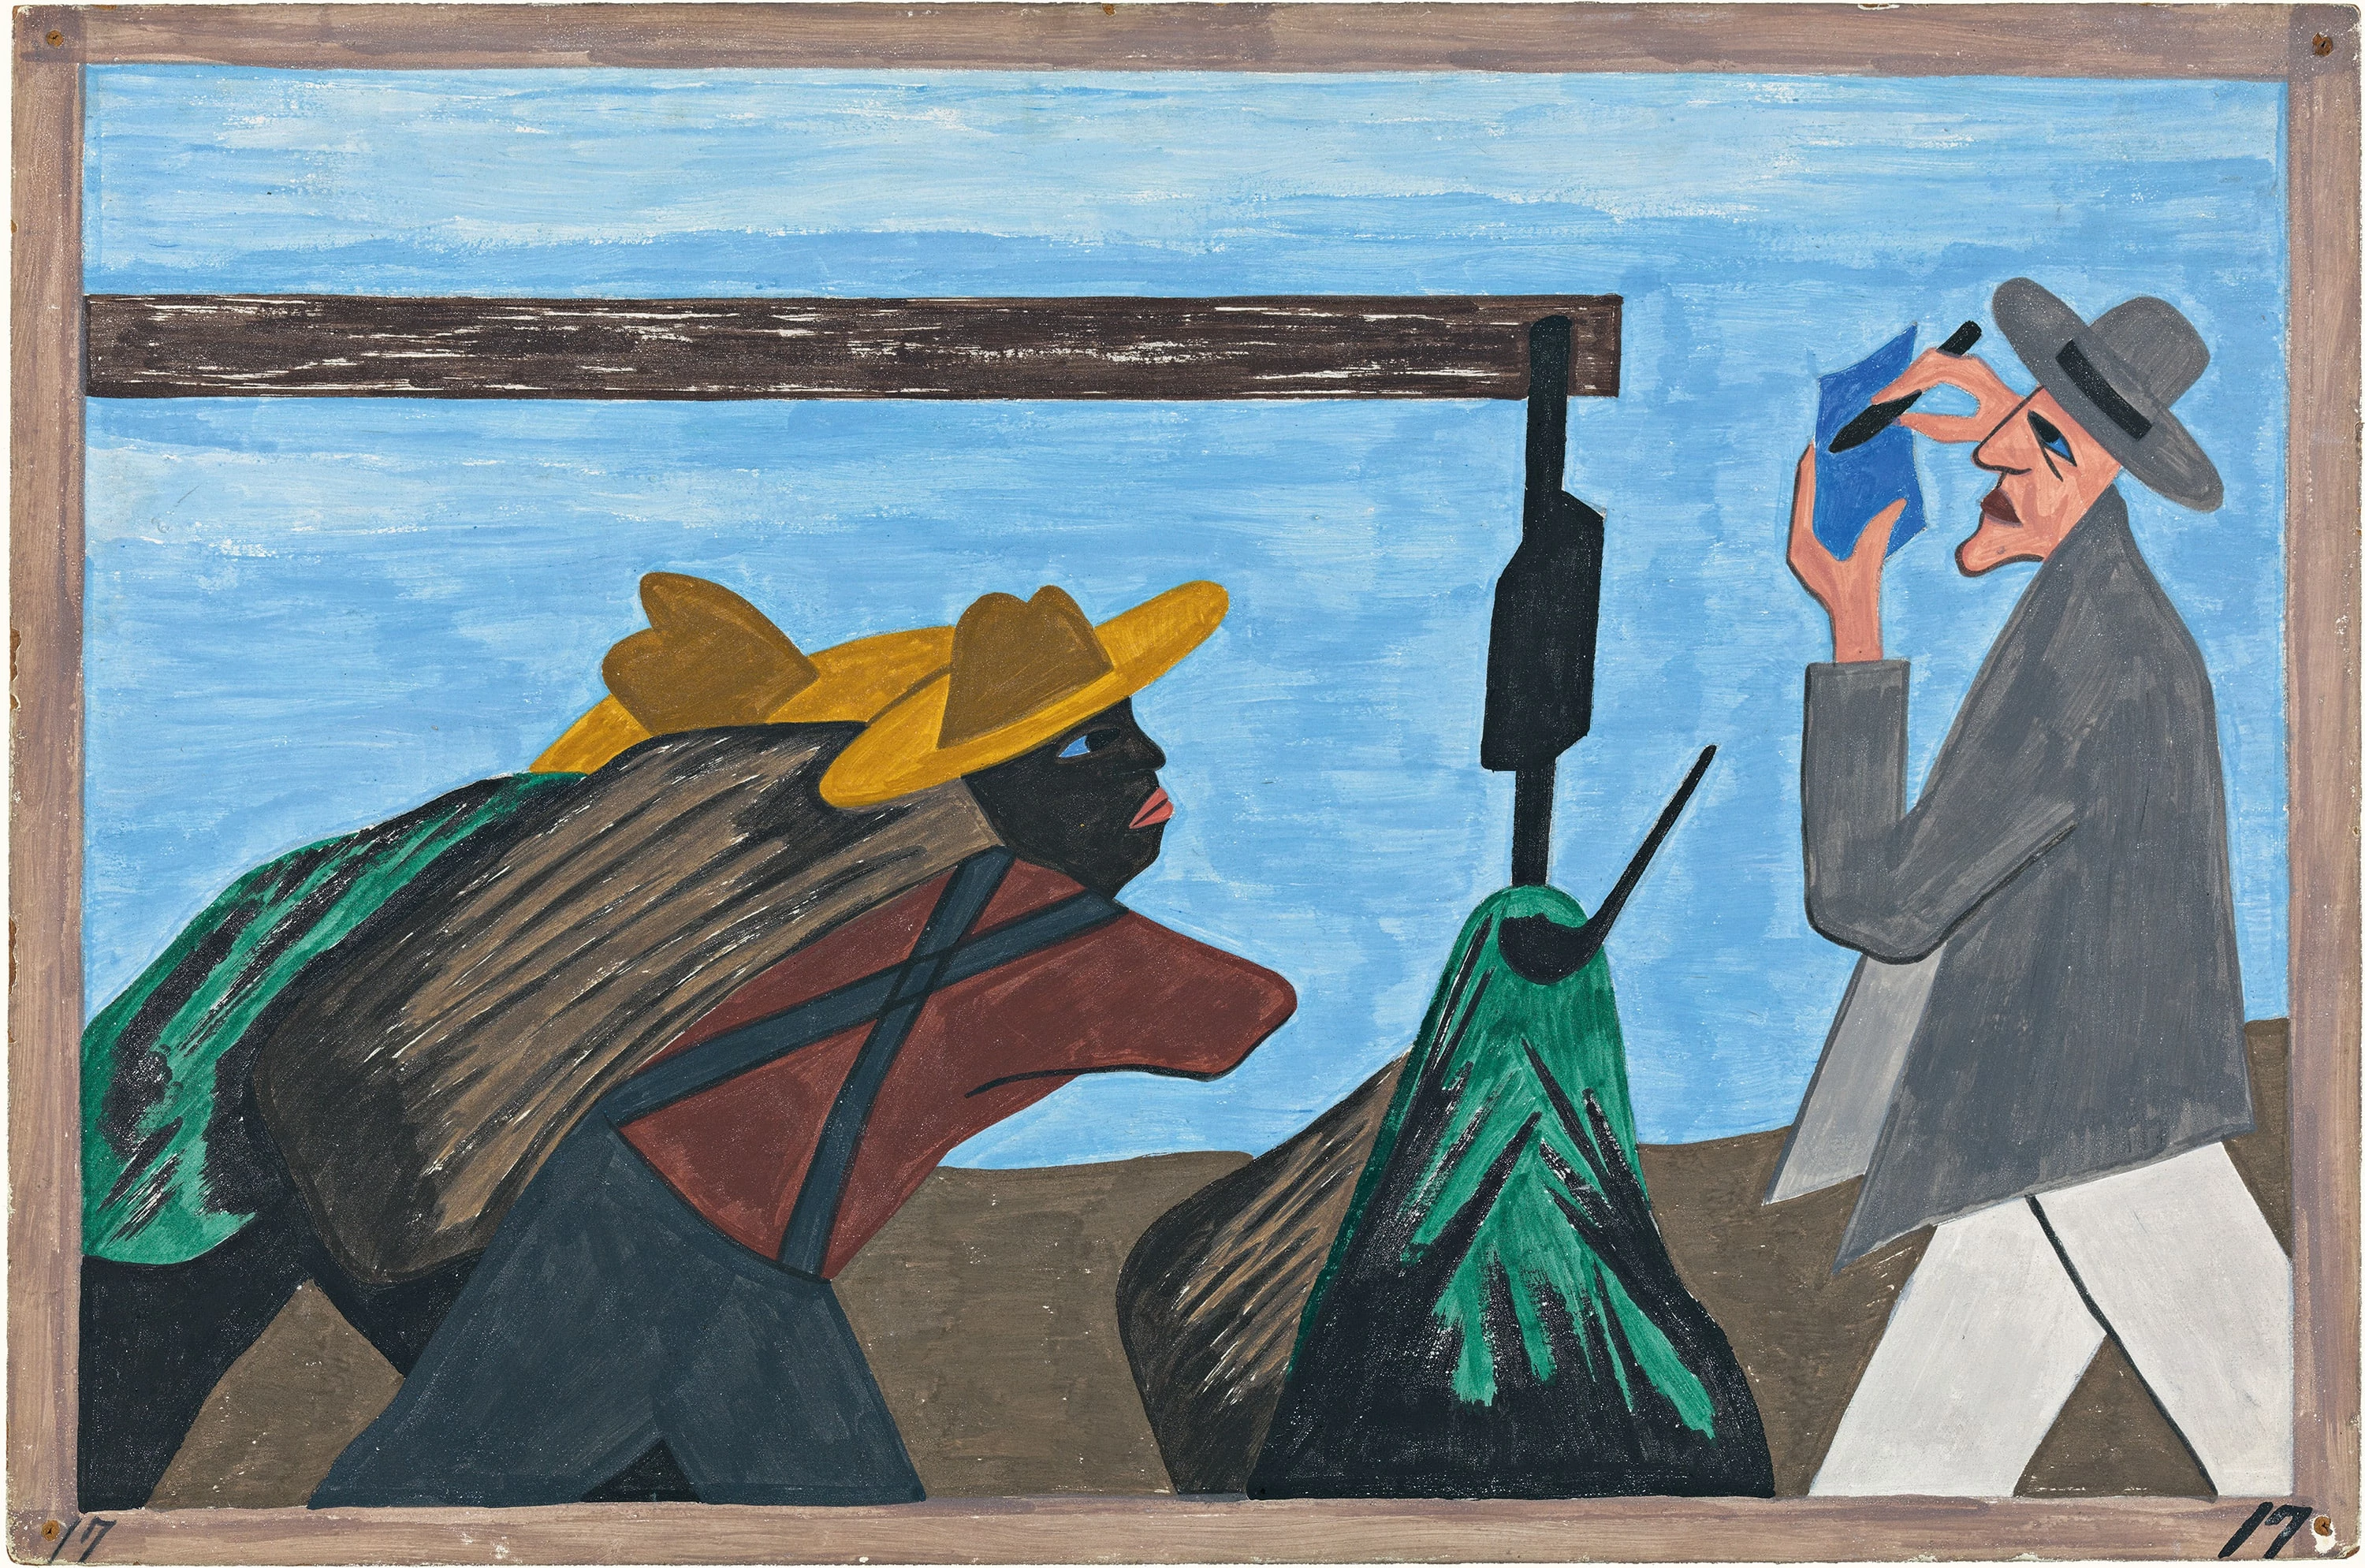 Migration Series No.17:  Tenant farmers received harsh treatment at the hands of the planter, Jacob Lawrence